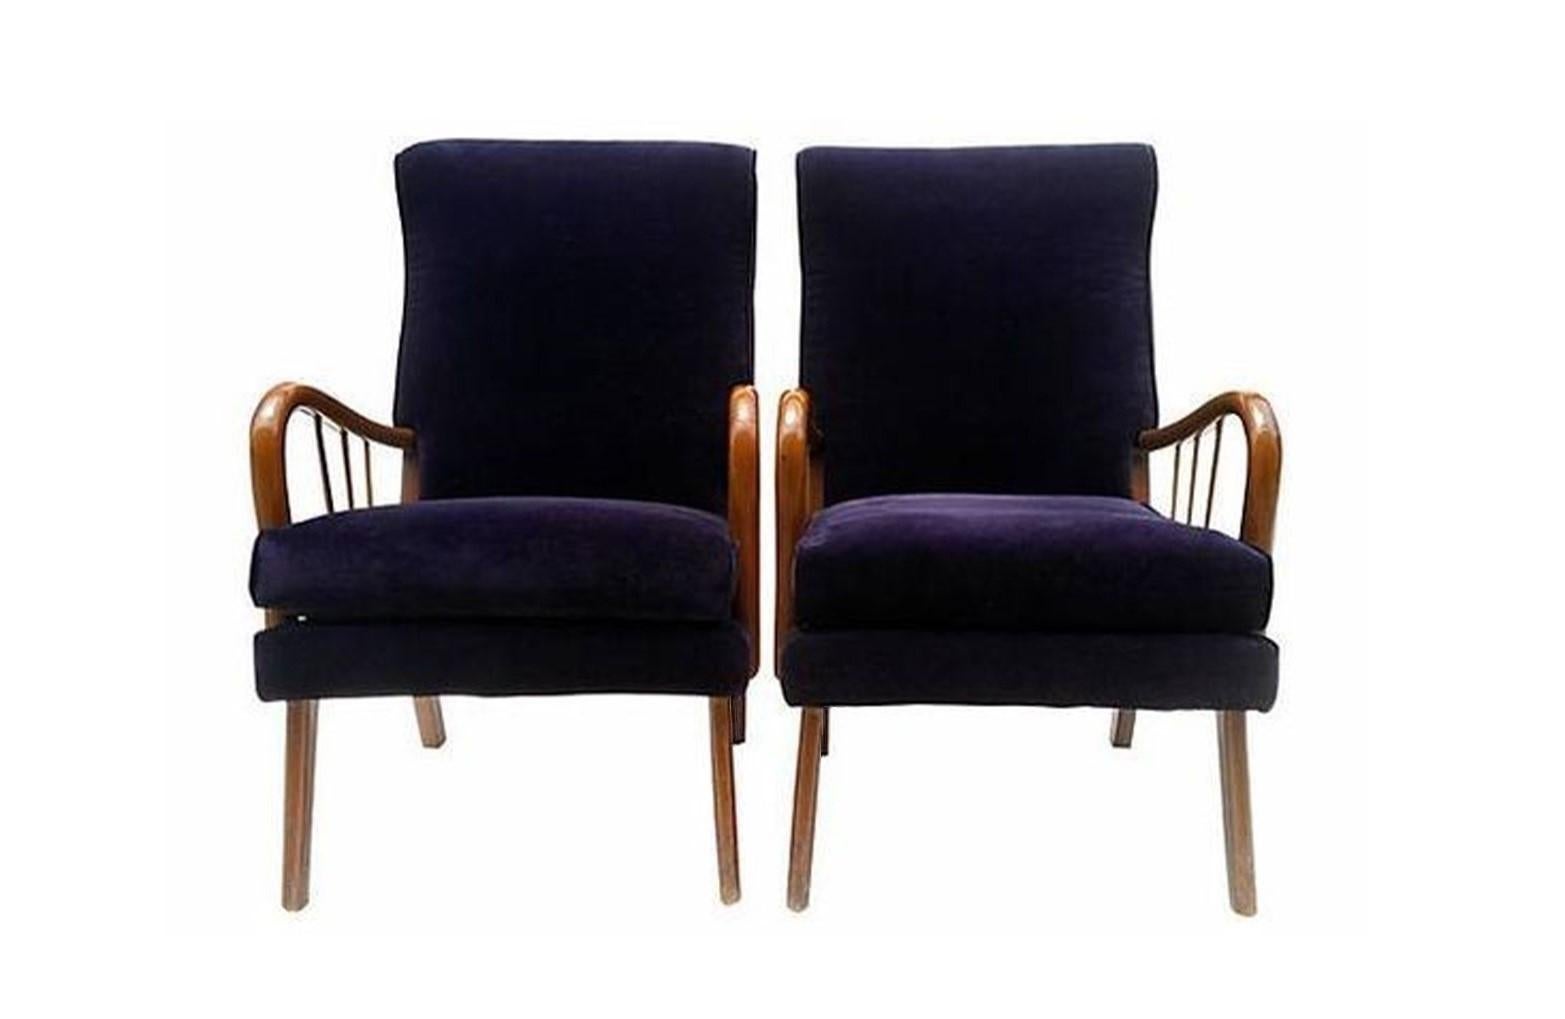 Stylish Paolo Buffa-style lounge chairs, circa 1950s. Wood frames having a slightly reclined back over a cushioned seat, spindle supports to the curved arms, rising on tapered legs. Original eggplant upholstery give these chairs a modern but